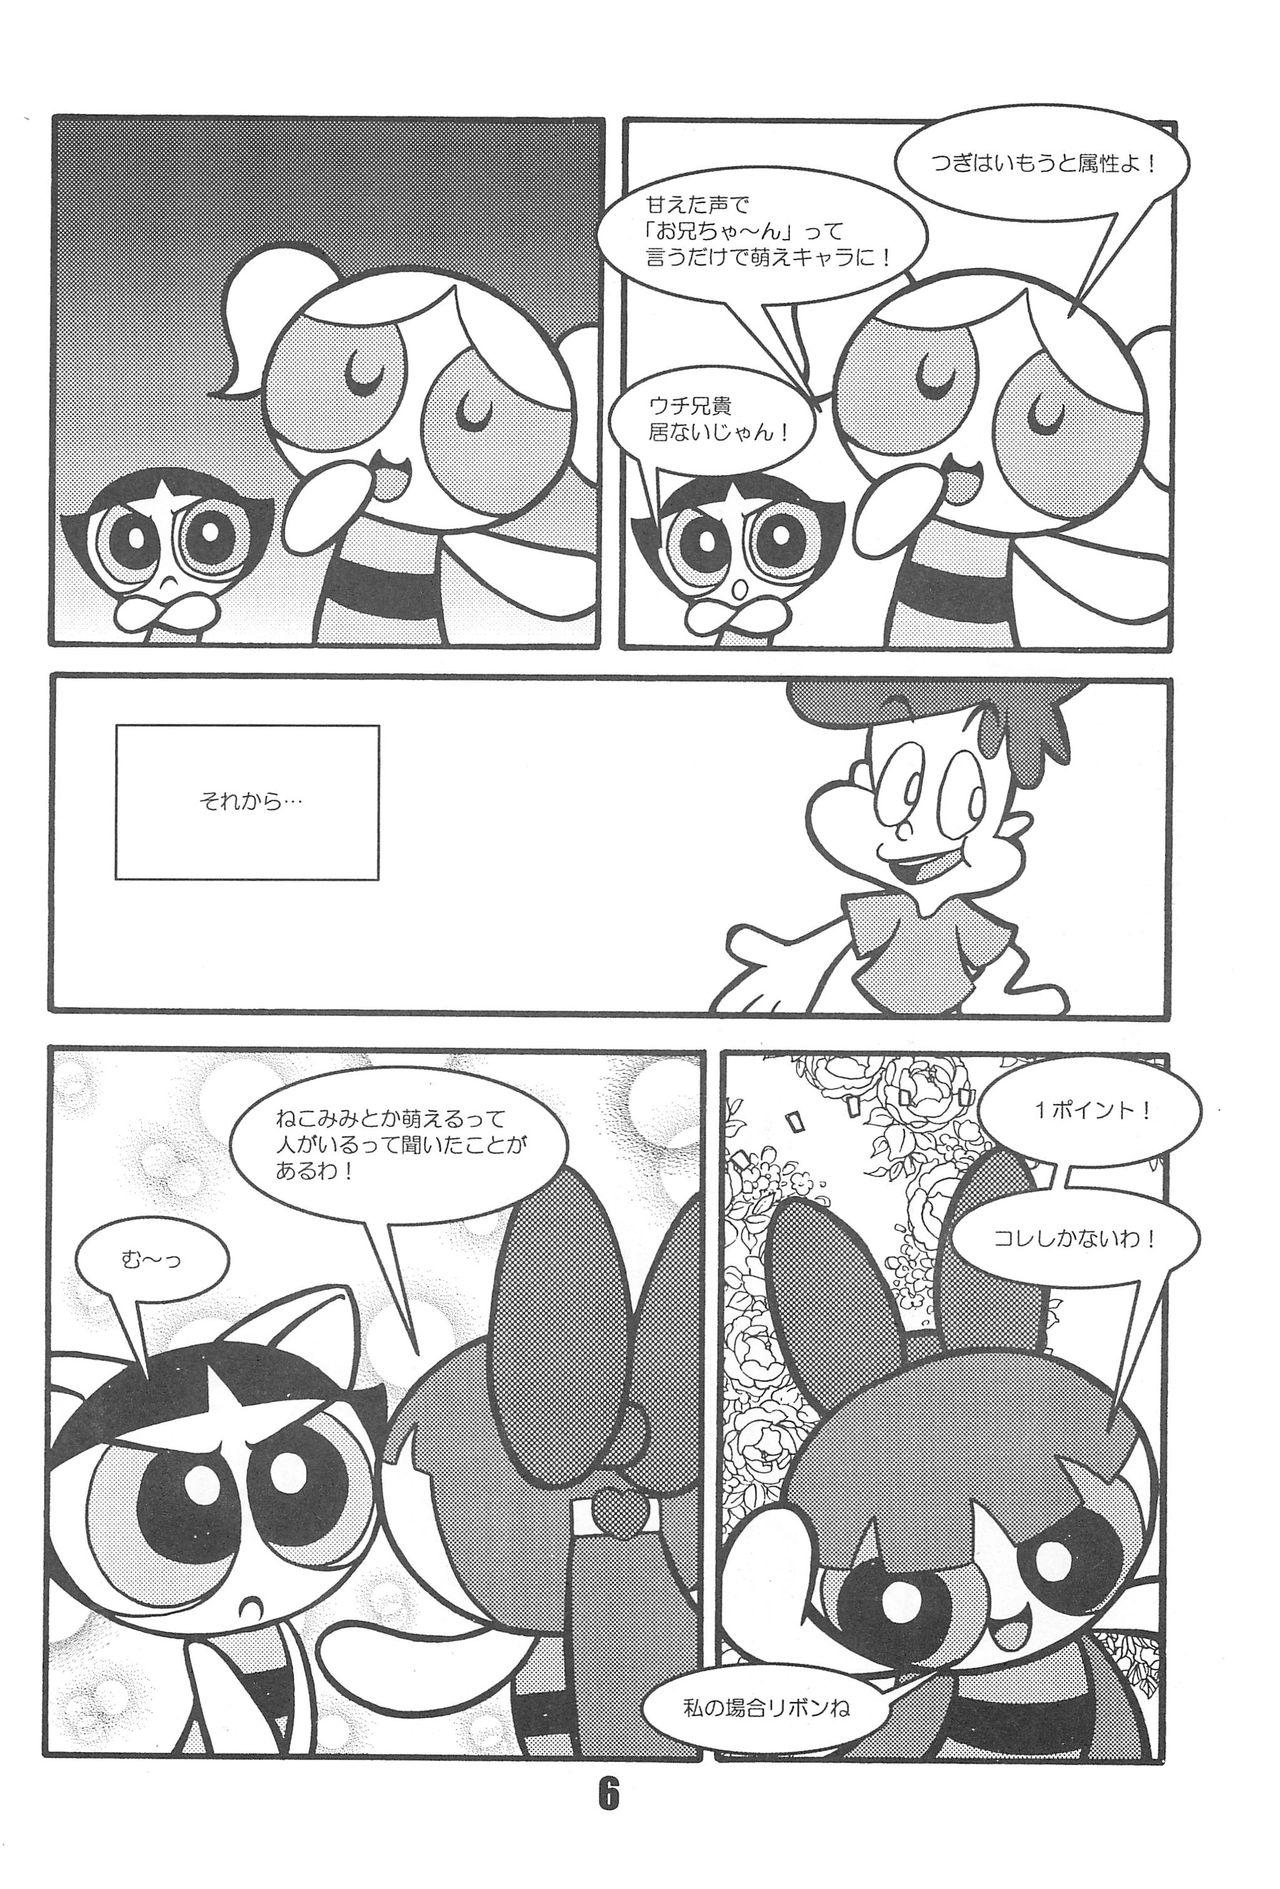 Milk Show Goes On! Funhouse 22th - The powerpuff girls Sola - Page 6